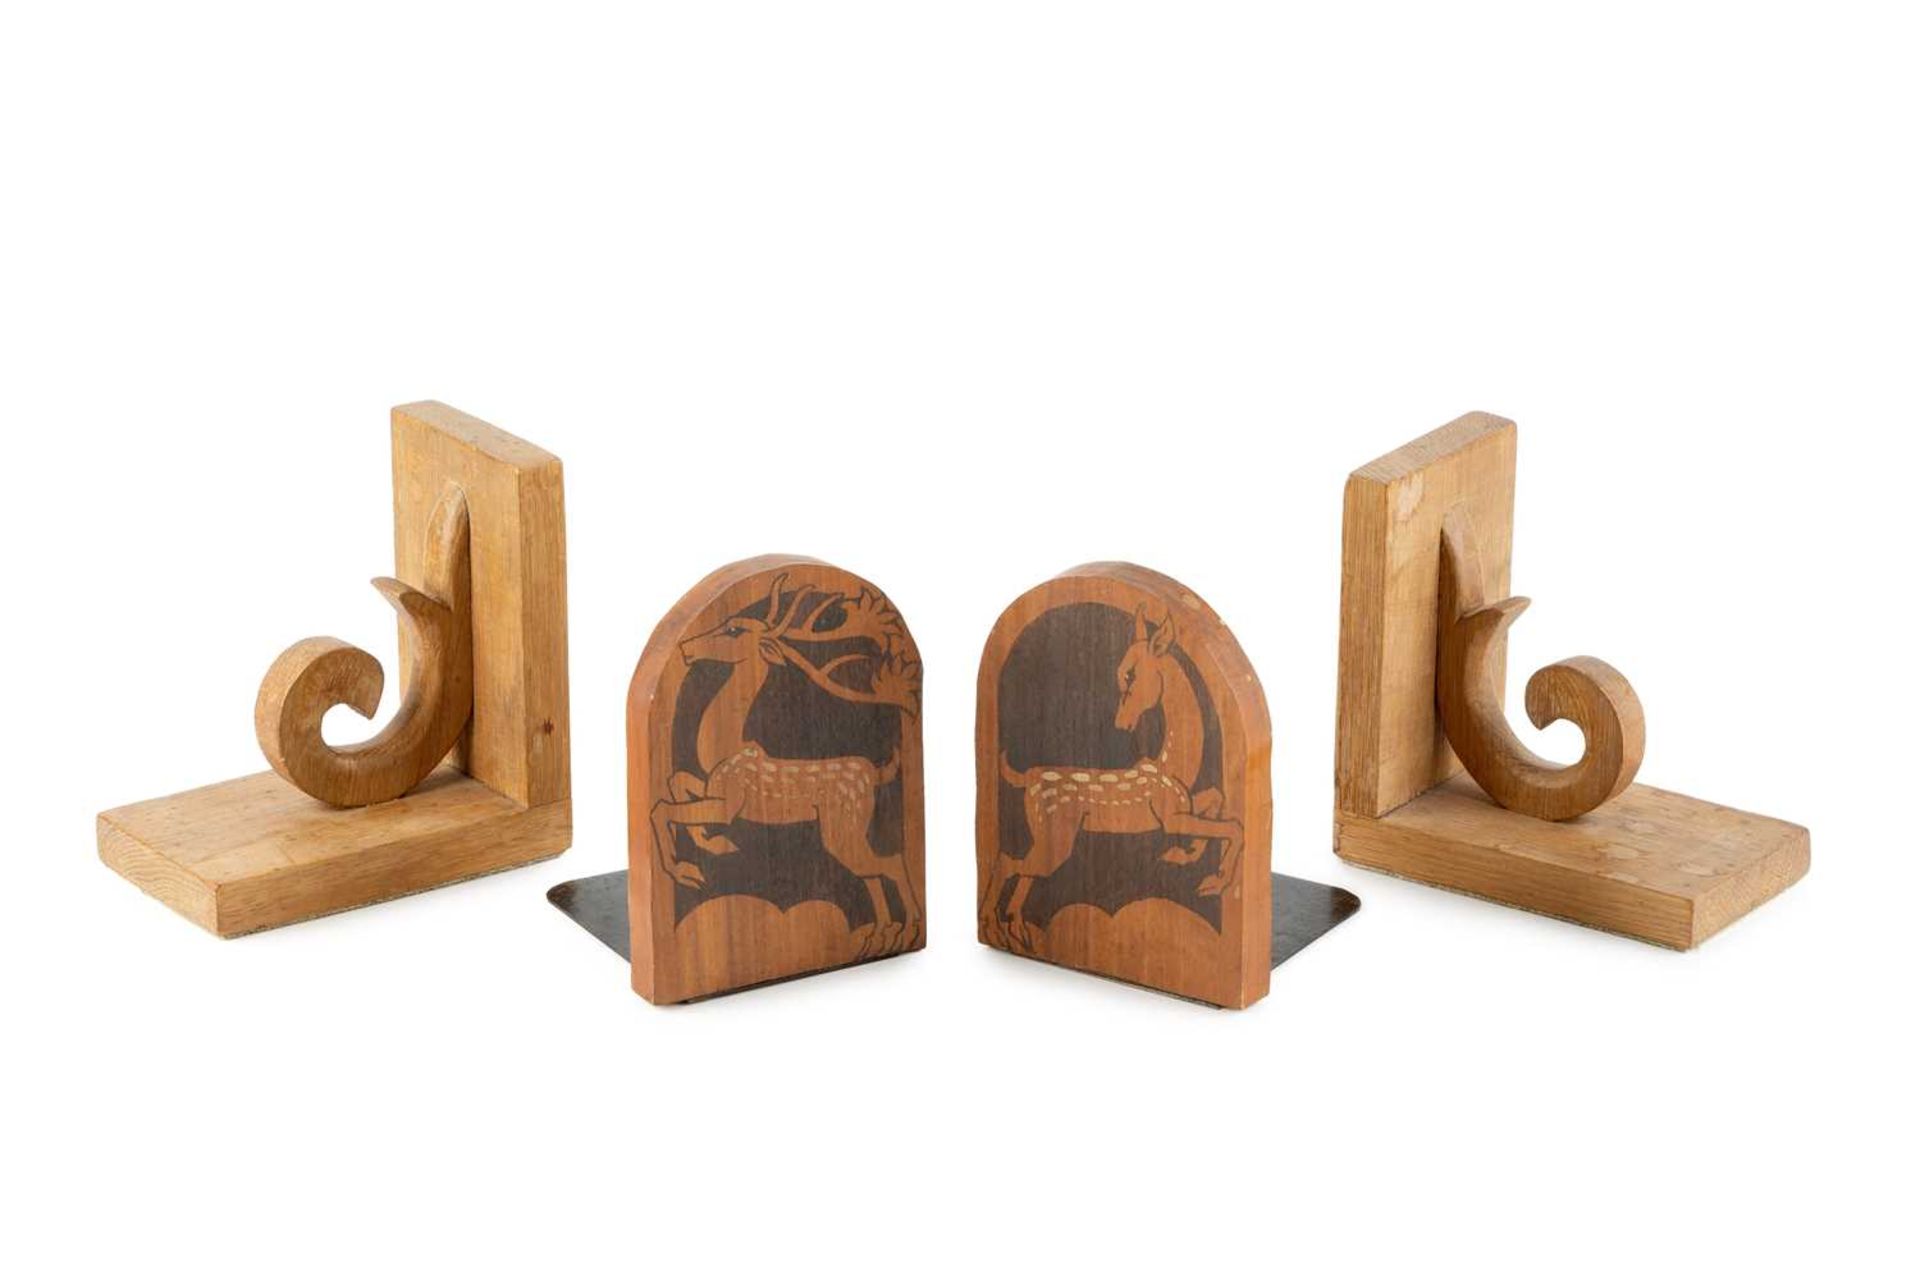 Cotswold School Pair of oak bookends 16 x 16cm; and pair of bookends decorated with deer, by Alley